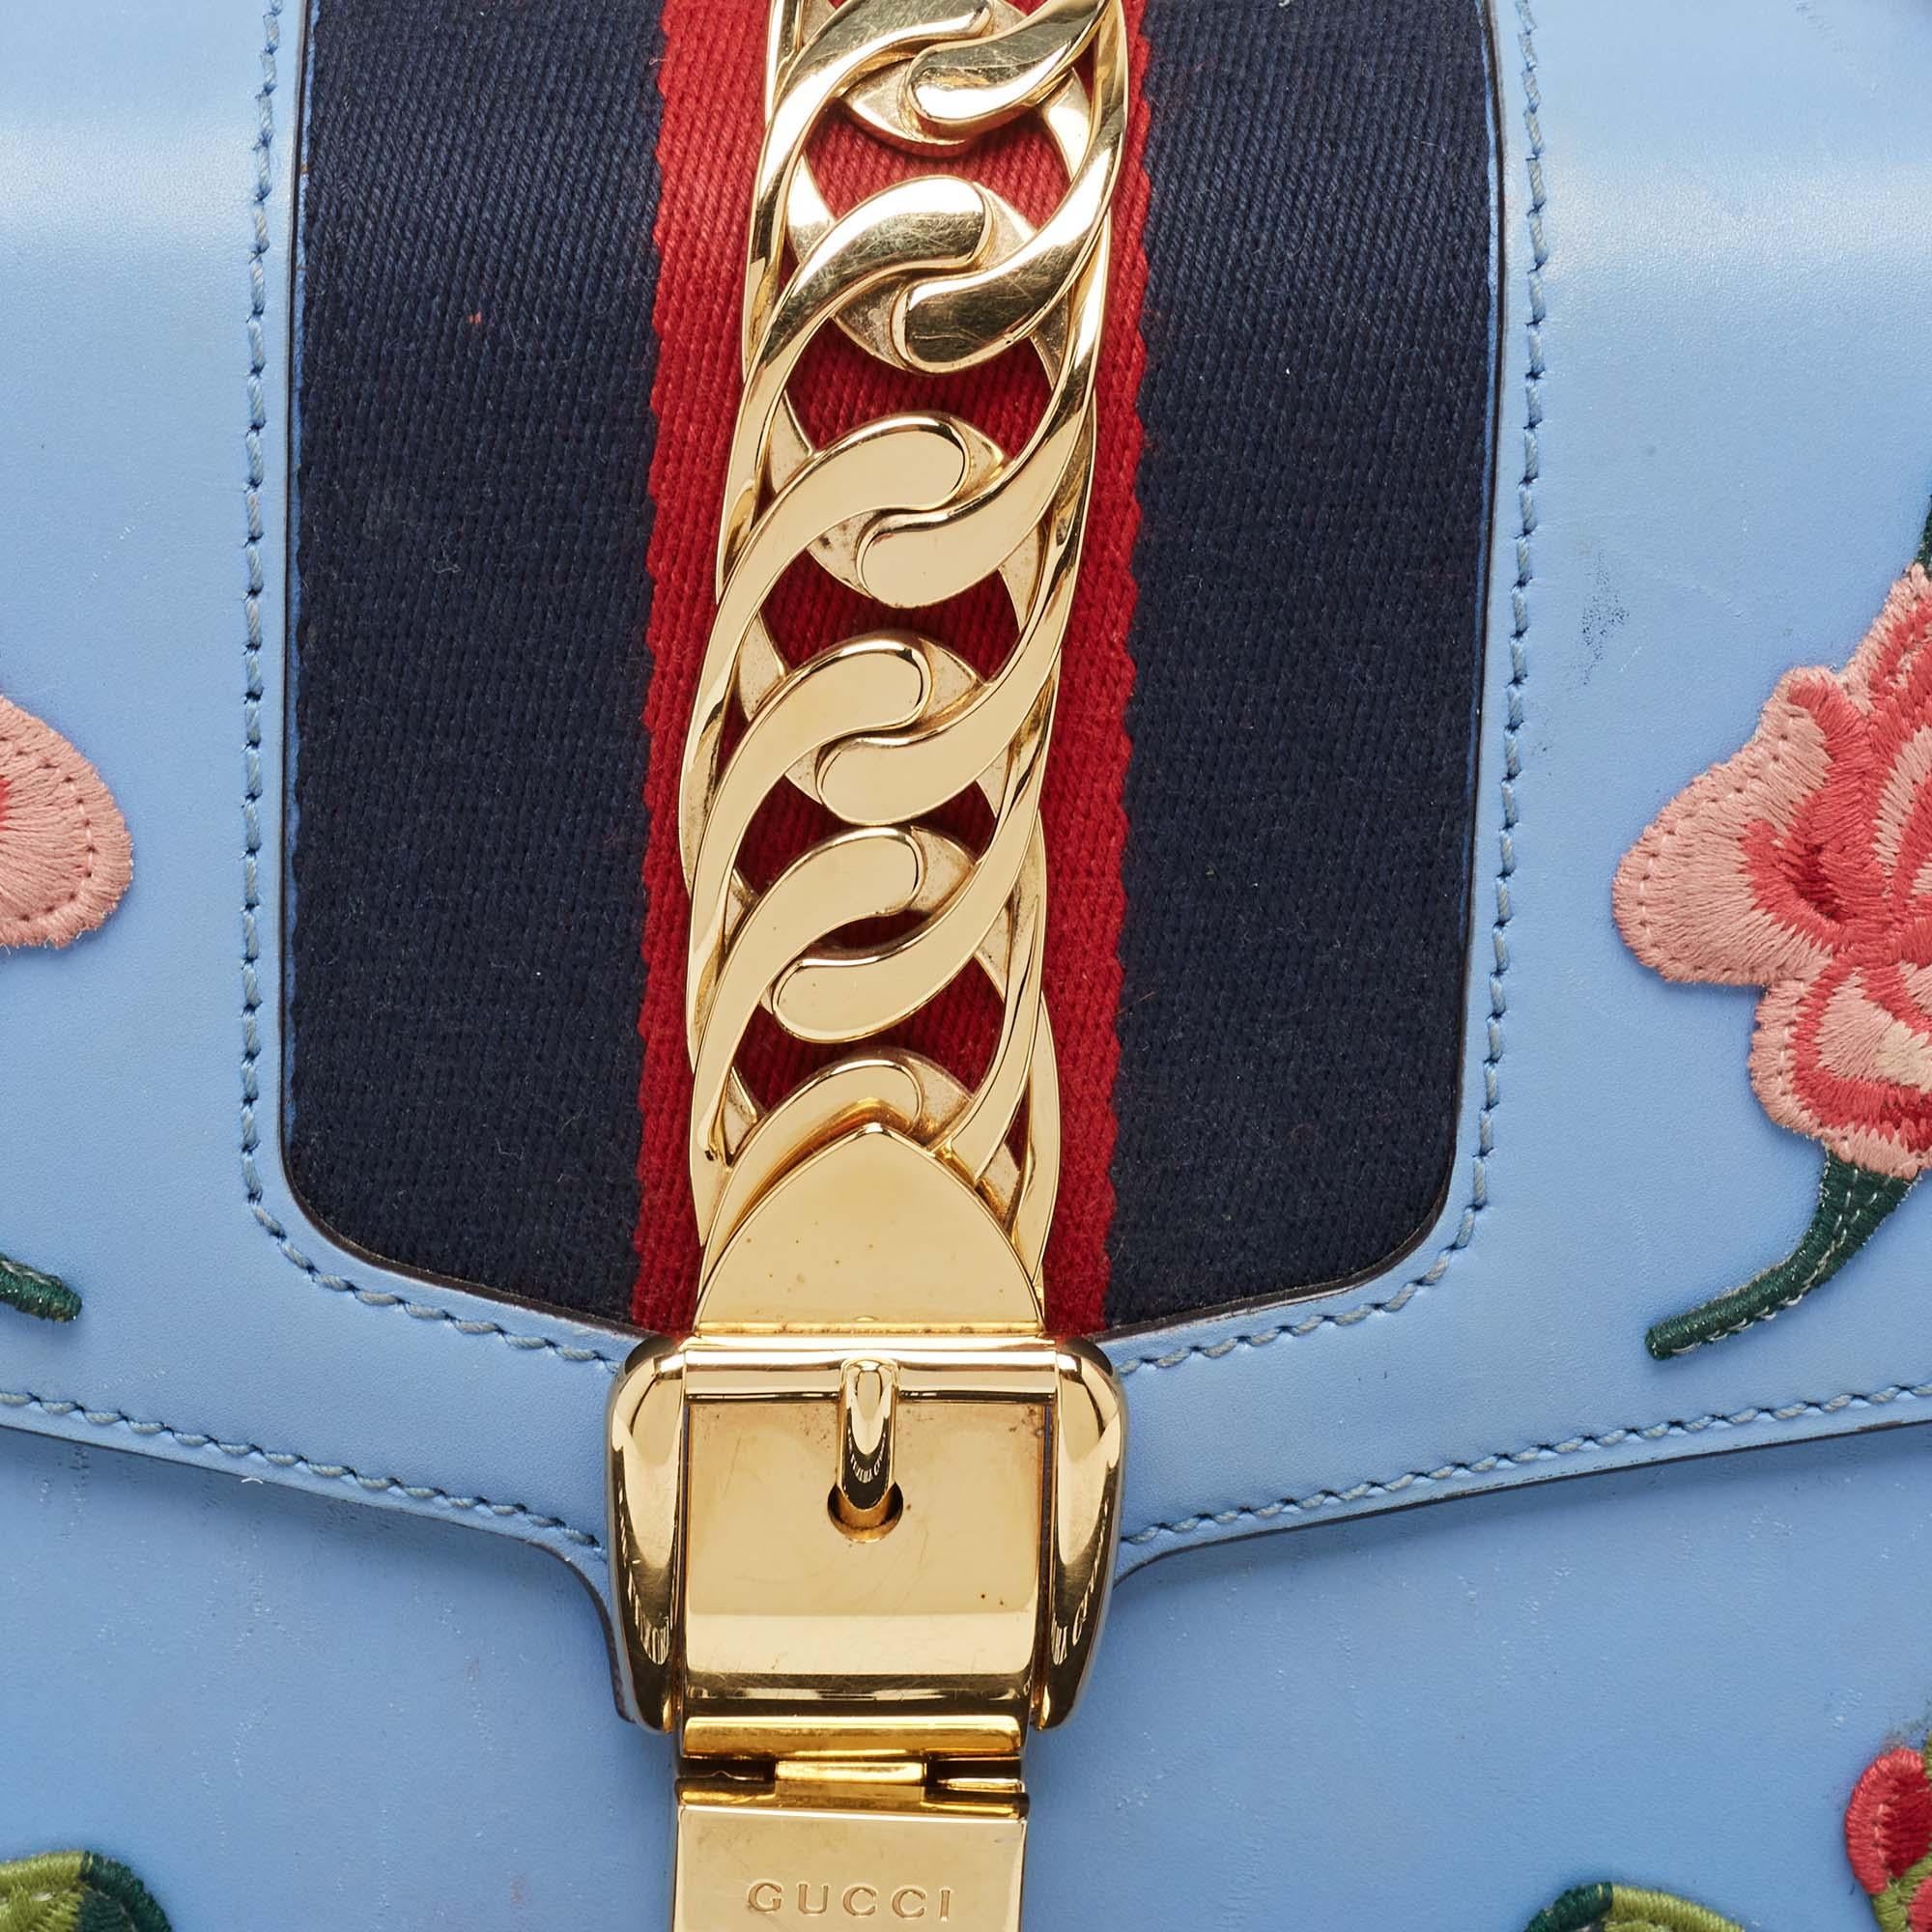 Gucci Blue Floral Embroidered Leather Medium Sylvie Top Handle Bag For Sale 14